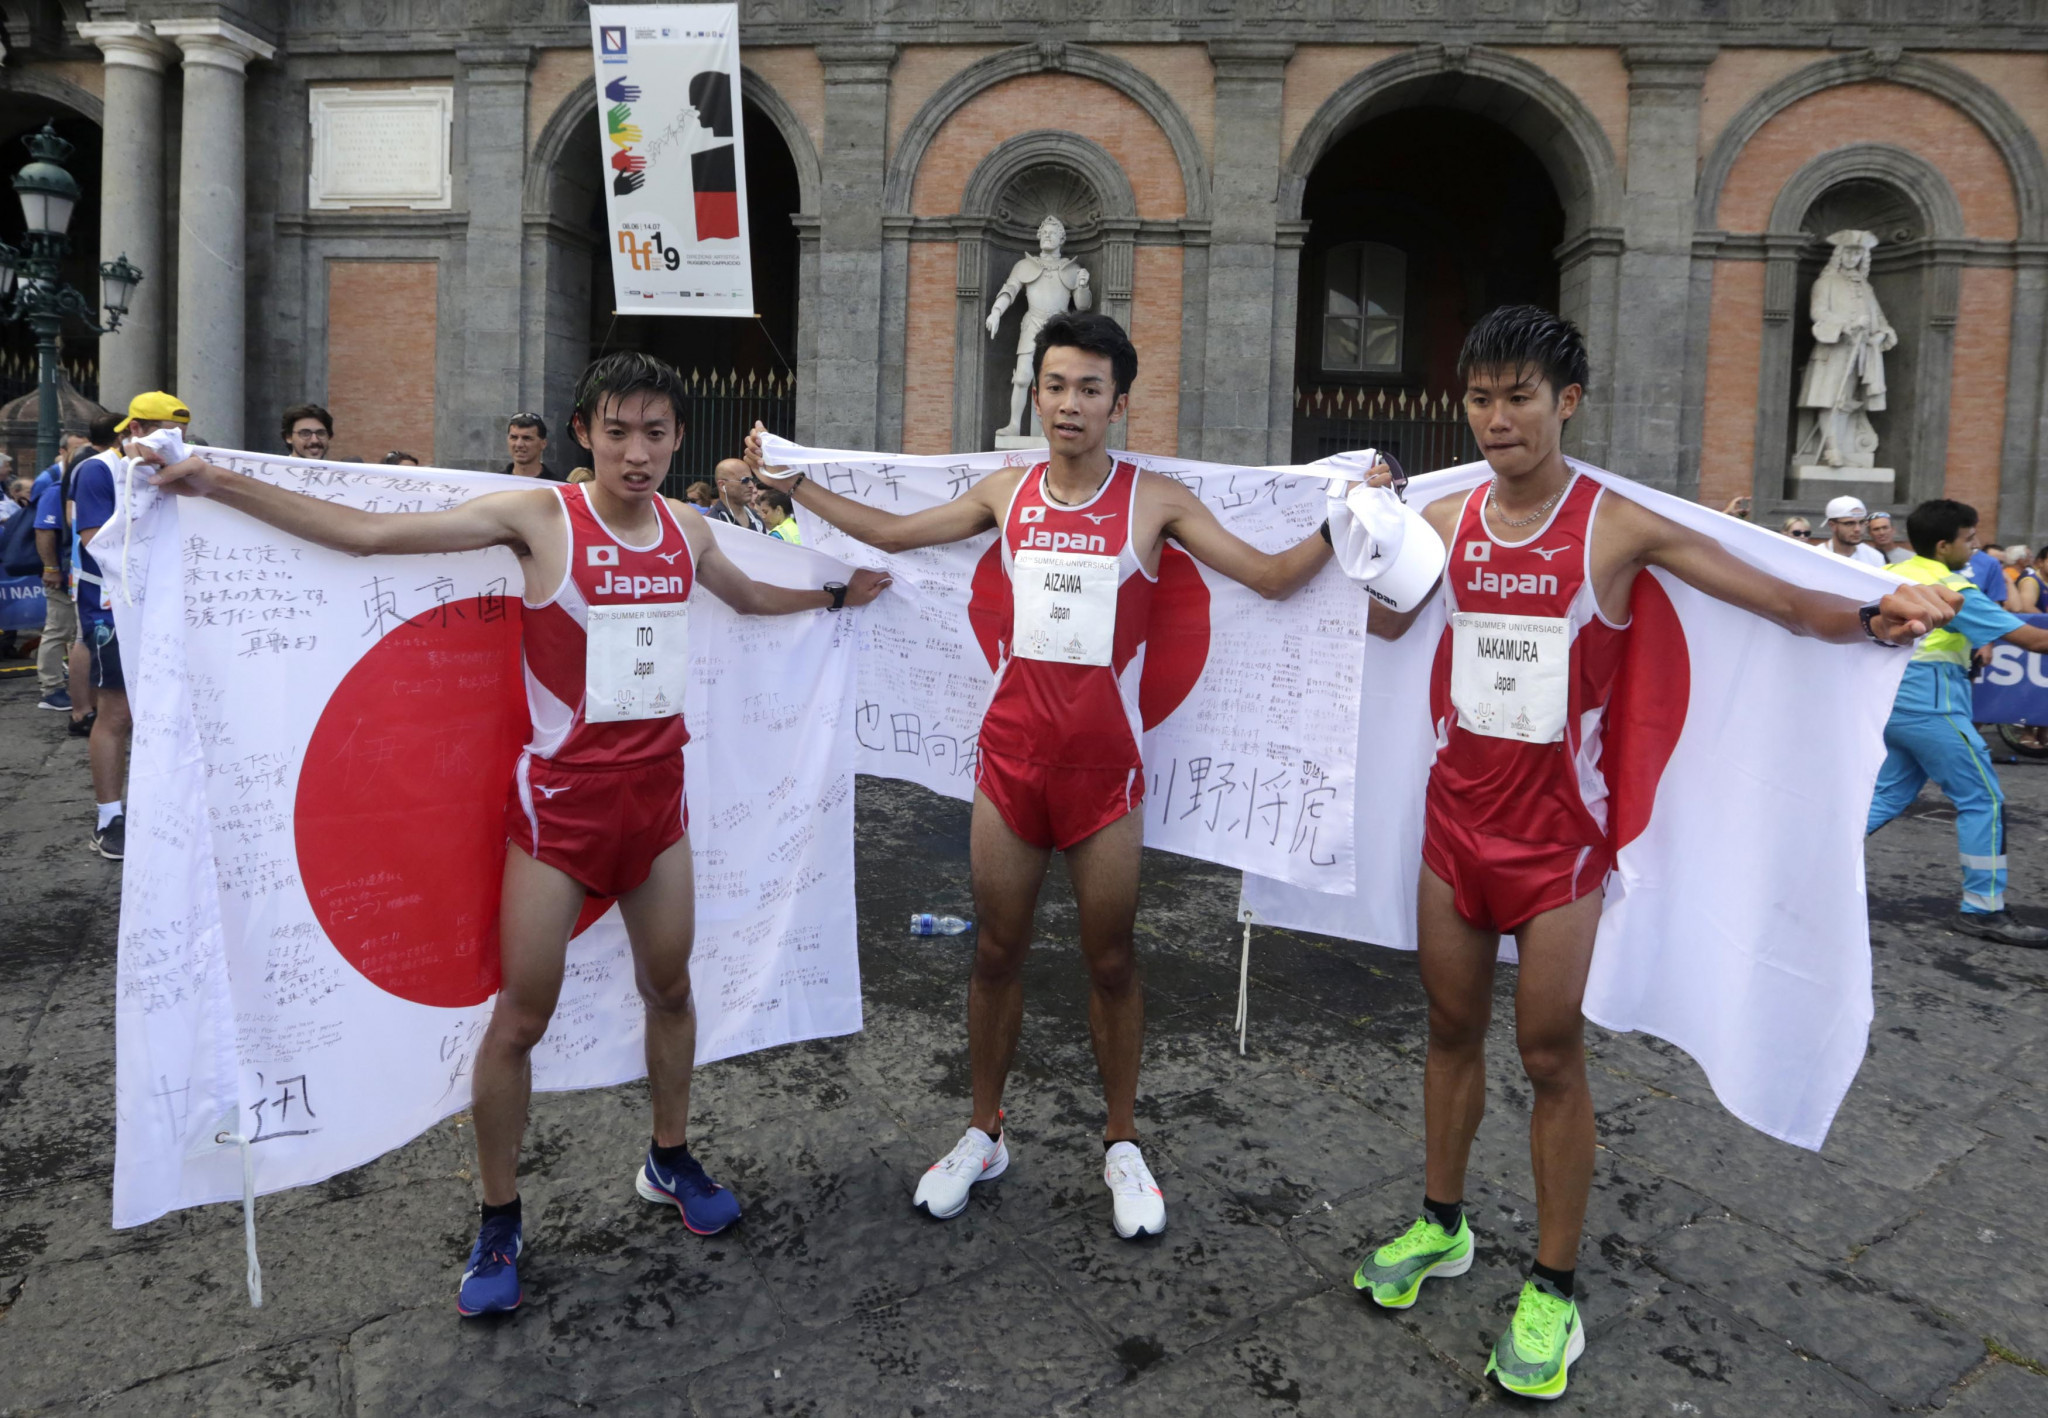 Japan grabbed a one-two-three in the men's half marathon after two Chinese athletes were disqualified for violating competition rules ©Naples 2019 